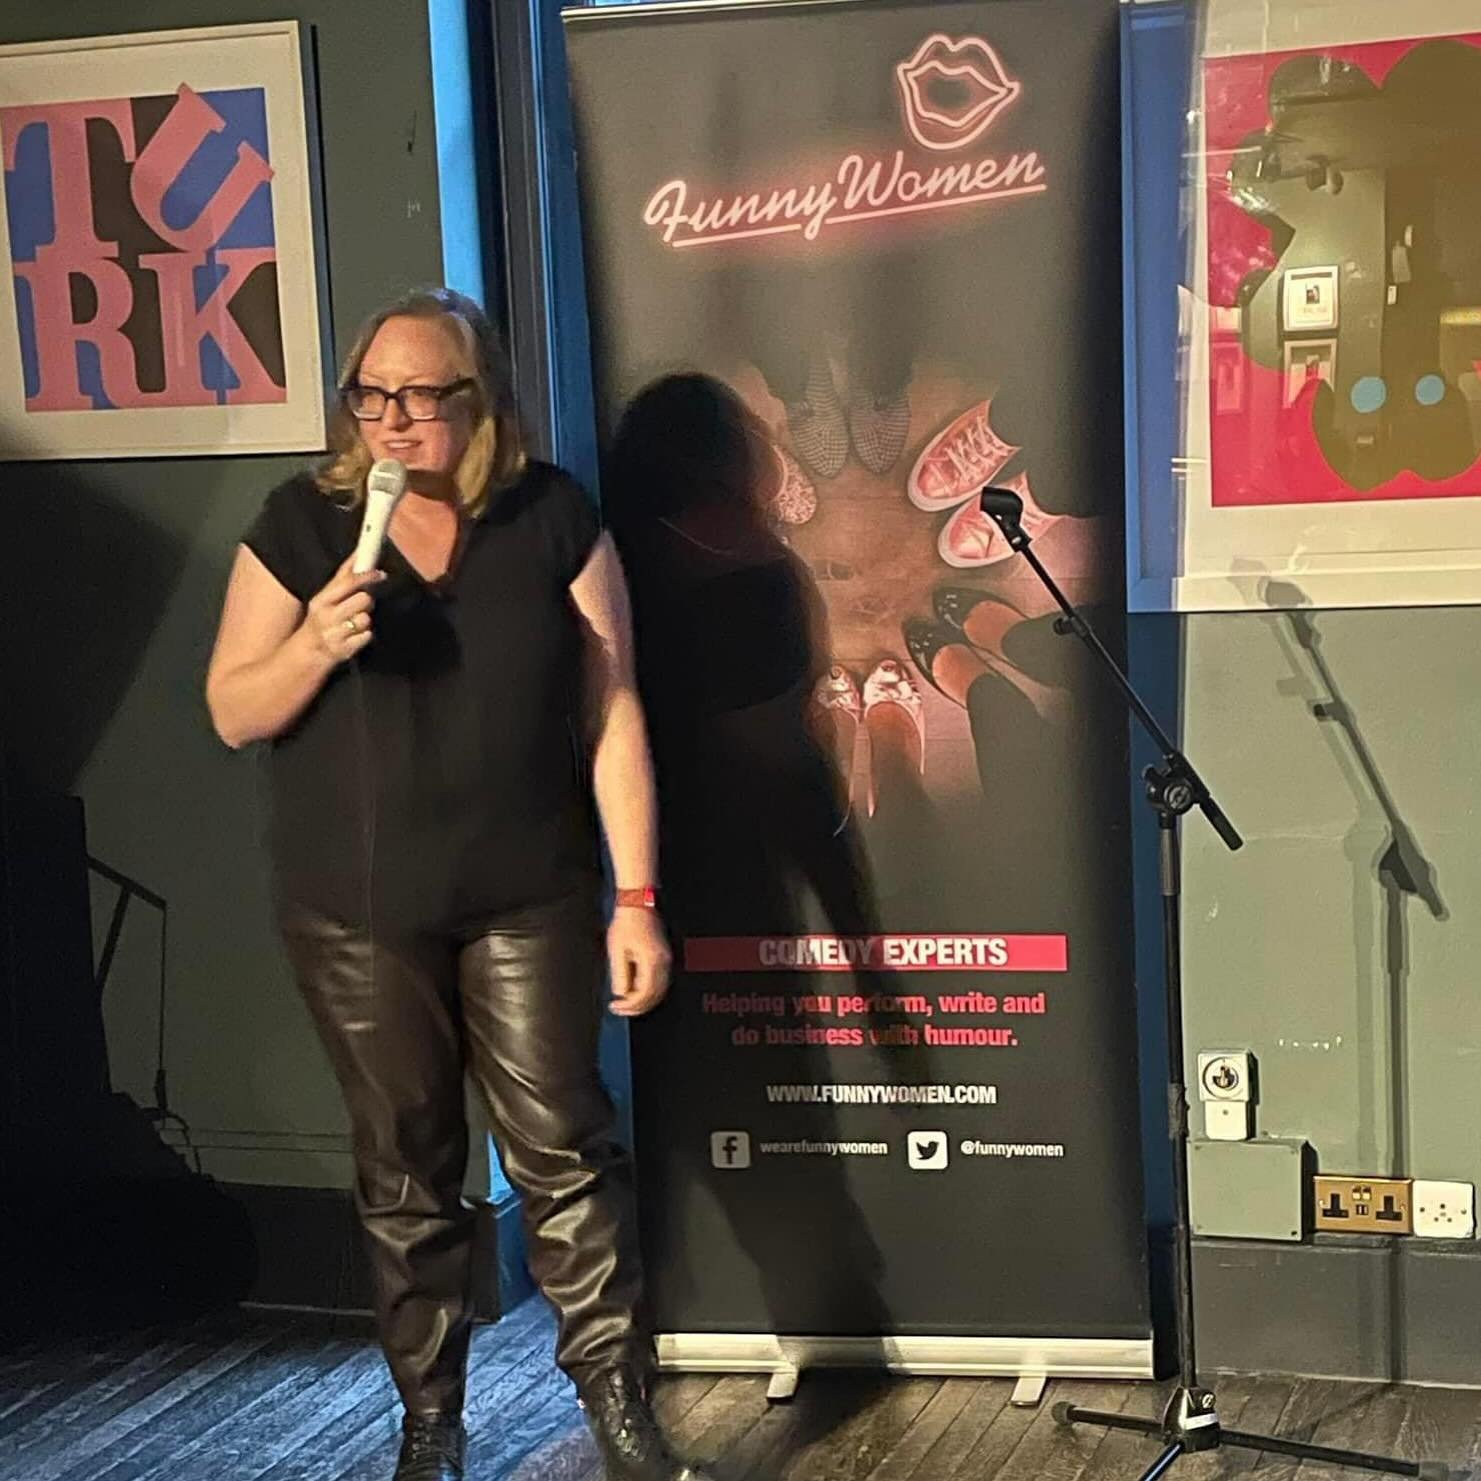 Had a fun time at the @funny_women open mic in London this week. Was good to see old friends and make new ones!

#livecomedy #standupcomedy #funnywomen #comedian #livecomedy #stageshot #femalecomedian